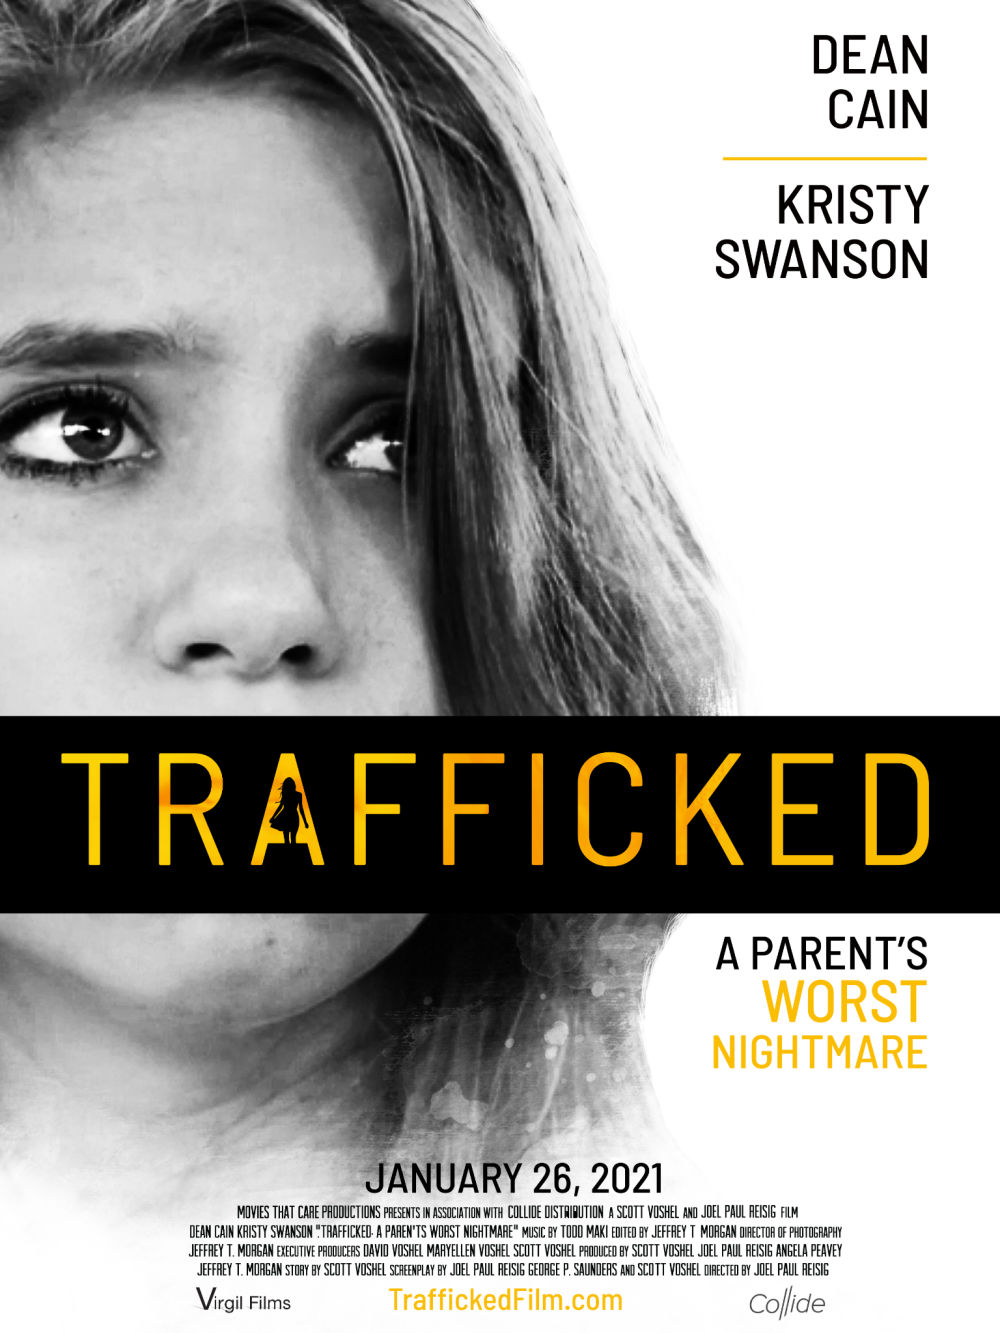 TRAFFICKED is based on actual stories of American families who have had their lives uprooted after a child has been abducted and trafficked.